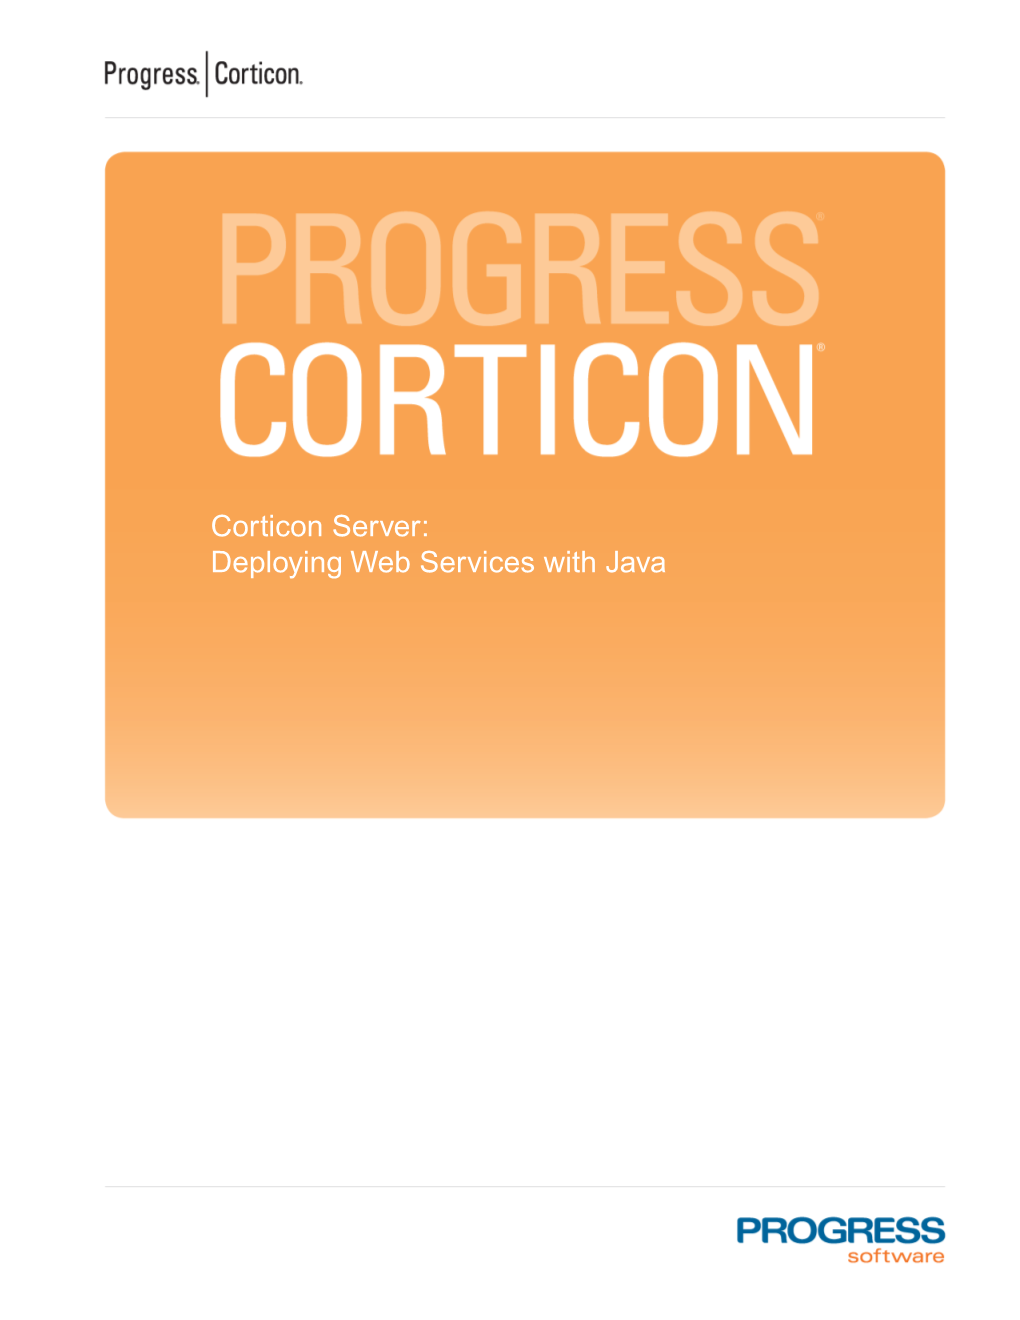 Corticon Server for Deploying Web Services with Java Is Supported on Various Application Servers, and Client Web Browsers